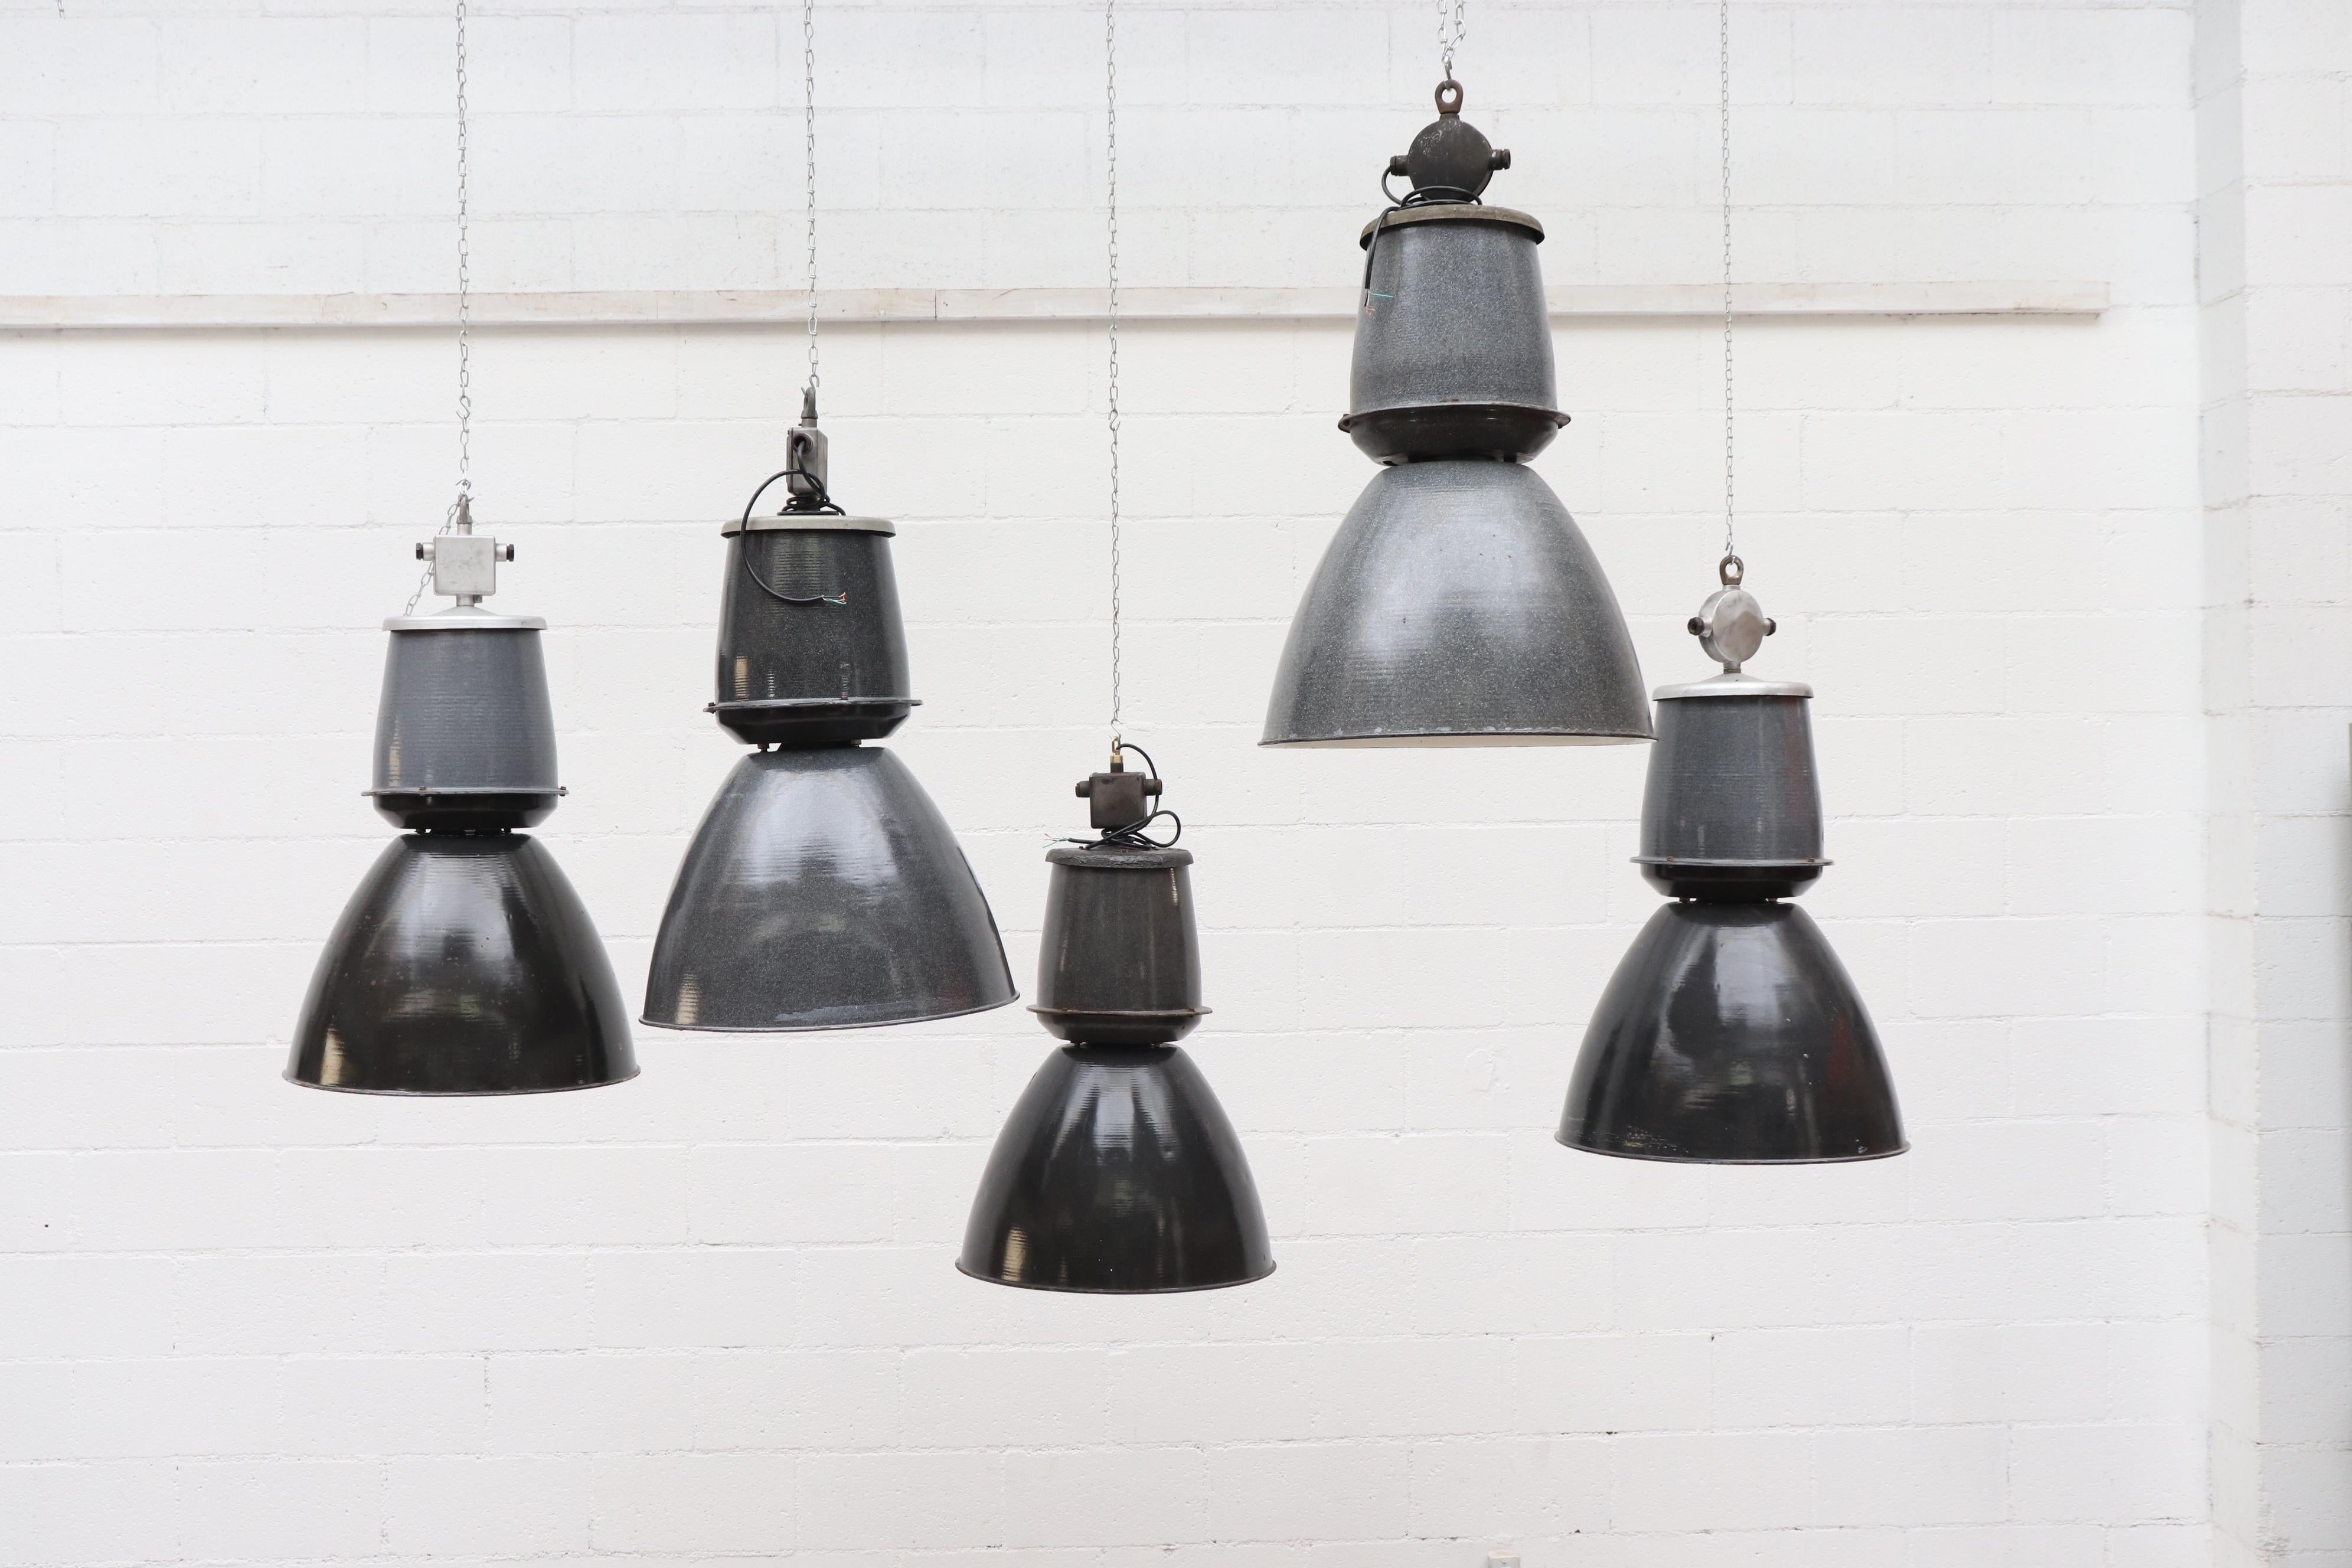 Industrial enameled factory ceiling lamps. Assorted speckled grey and dark charcoal shades and white enameled interior. Color combos vary per lamp. All in original condition with visible wear and minimal chipping consistent with their age and usage.